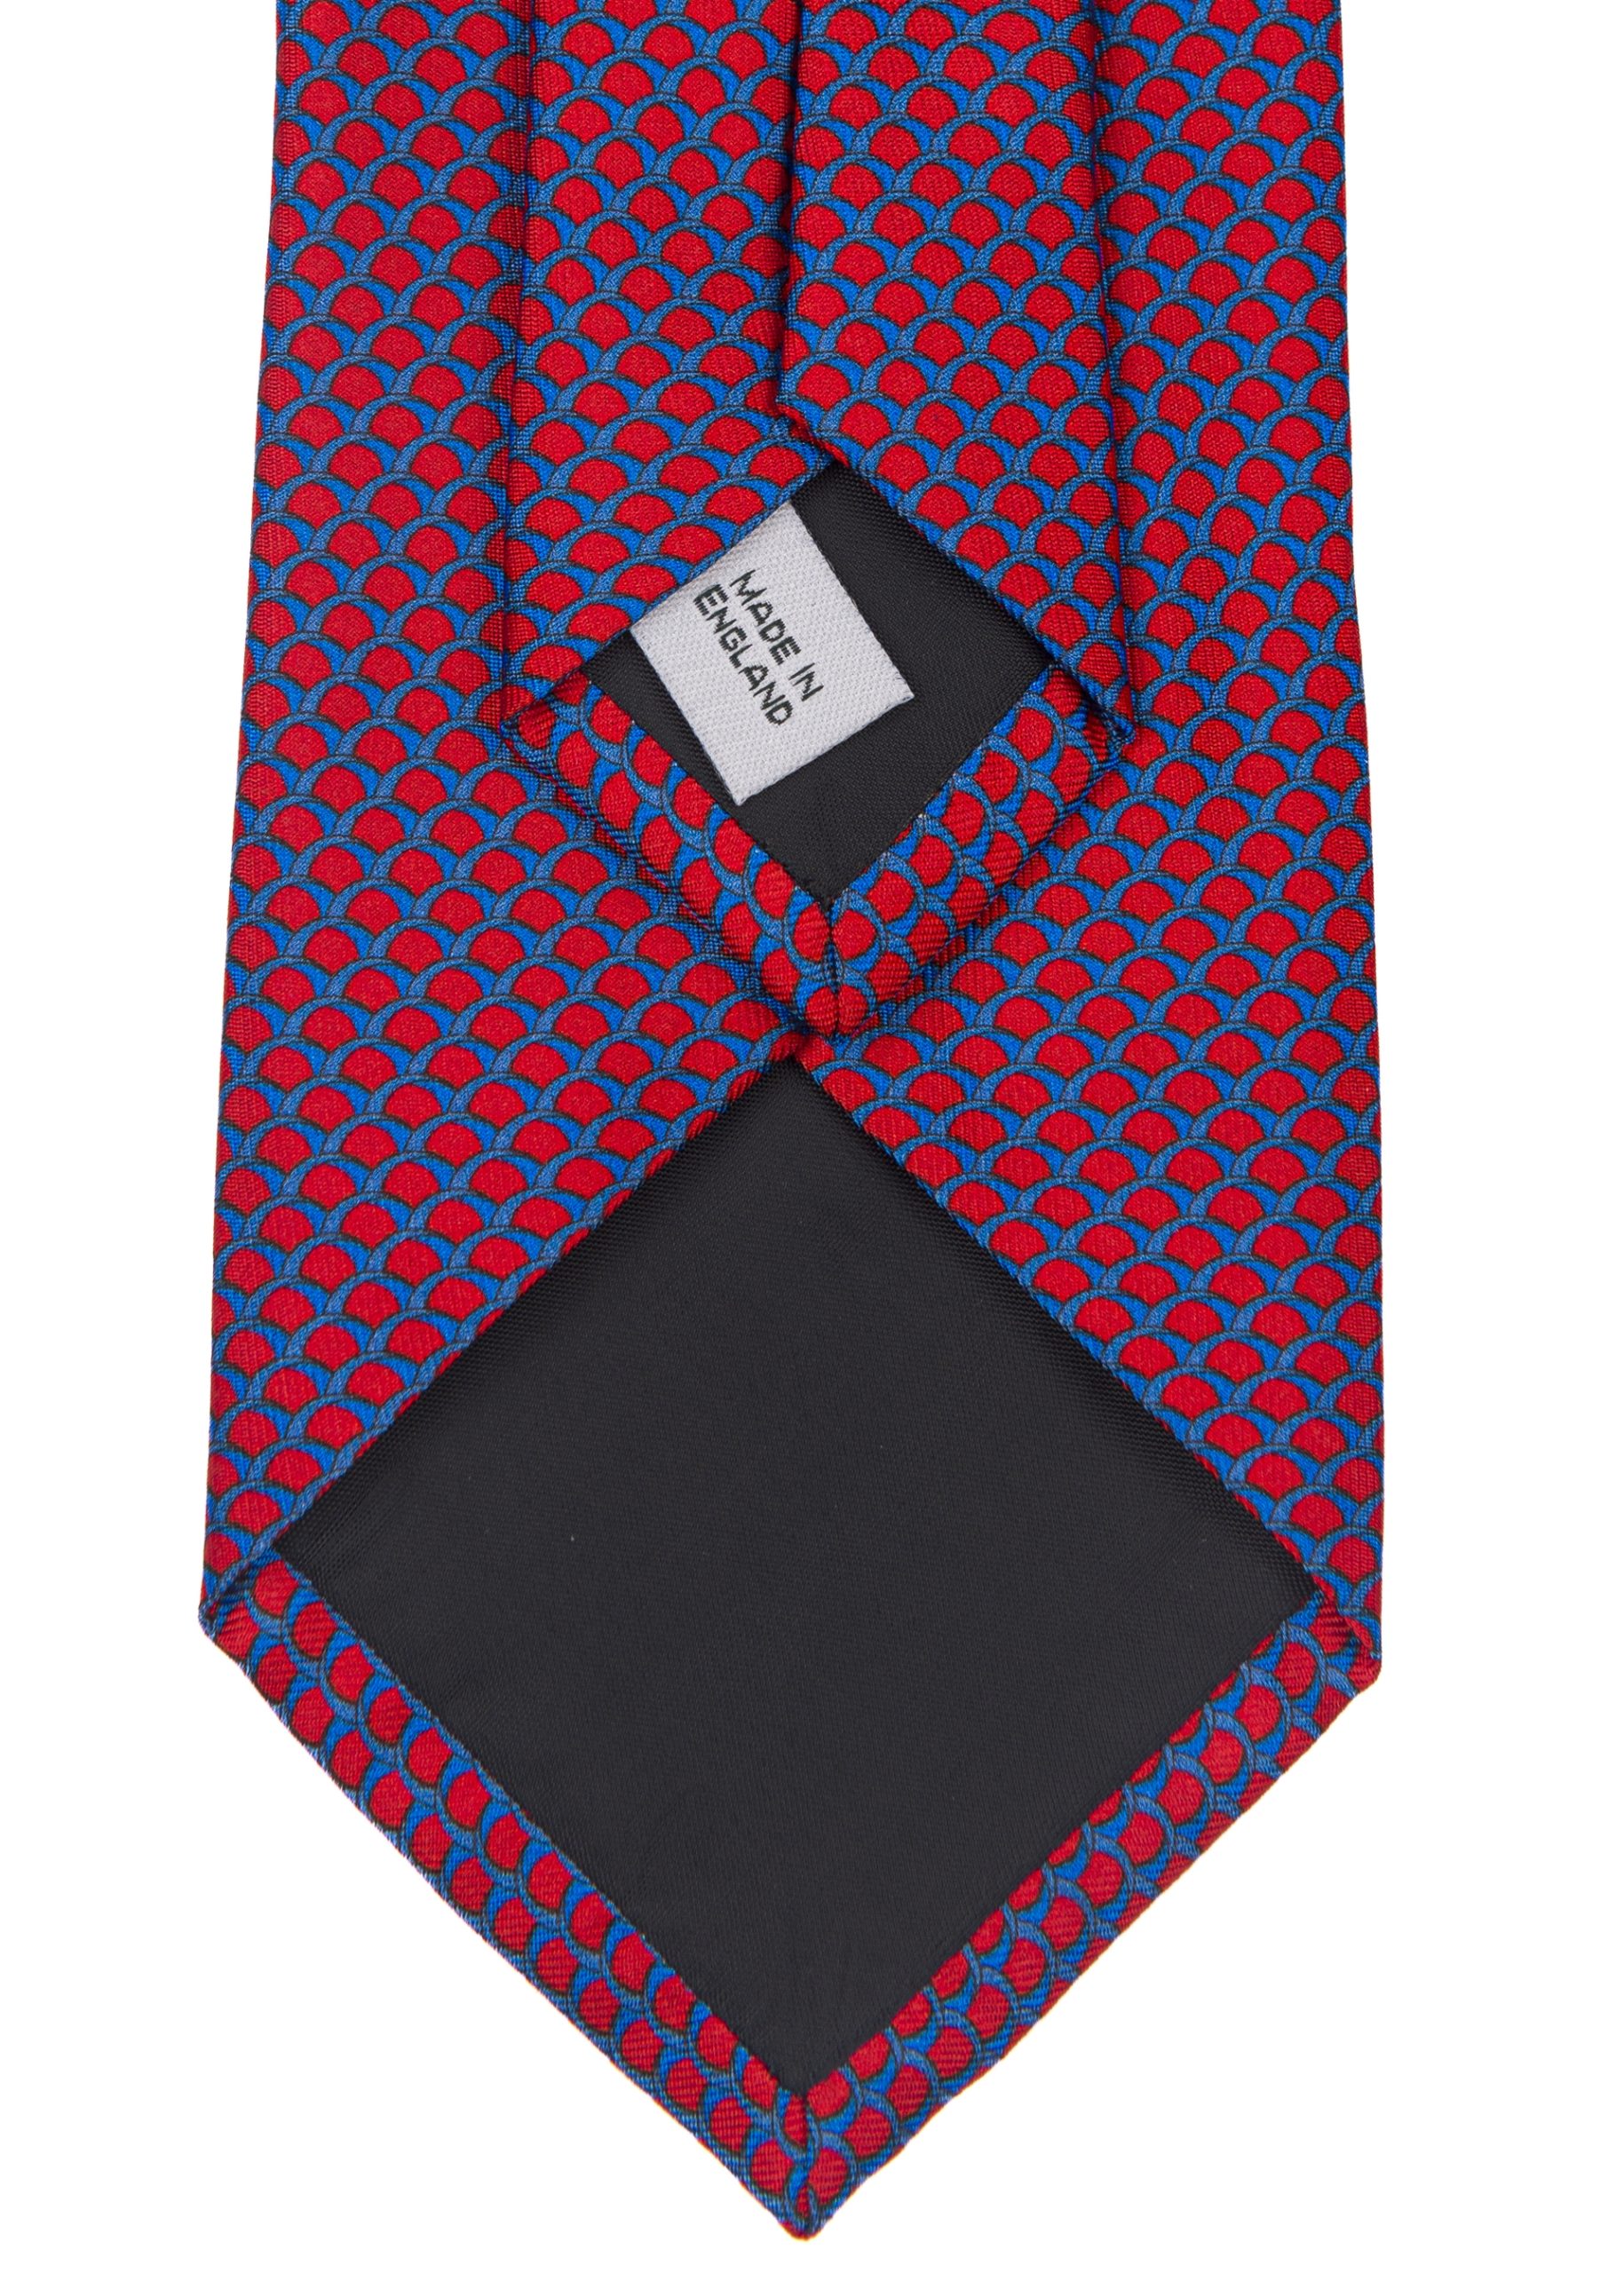 Roderick Charles men’s tie in red and blue colouring